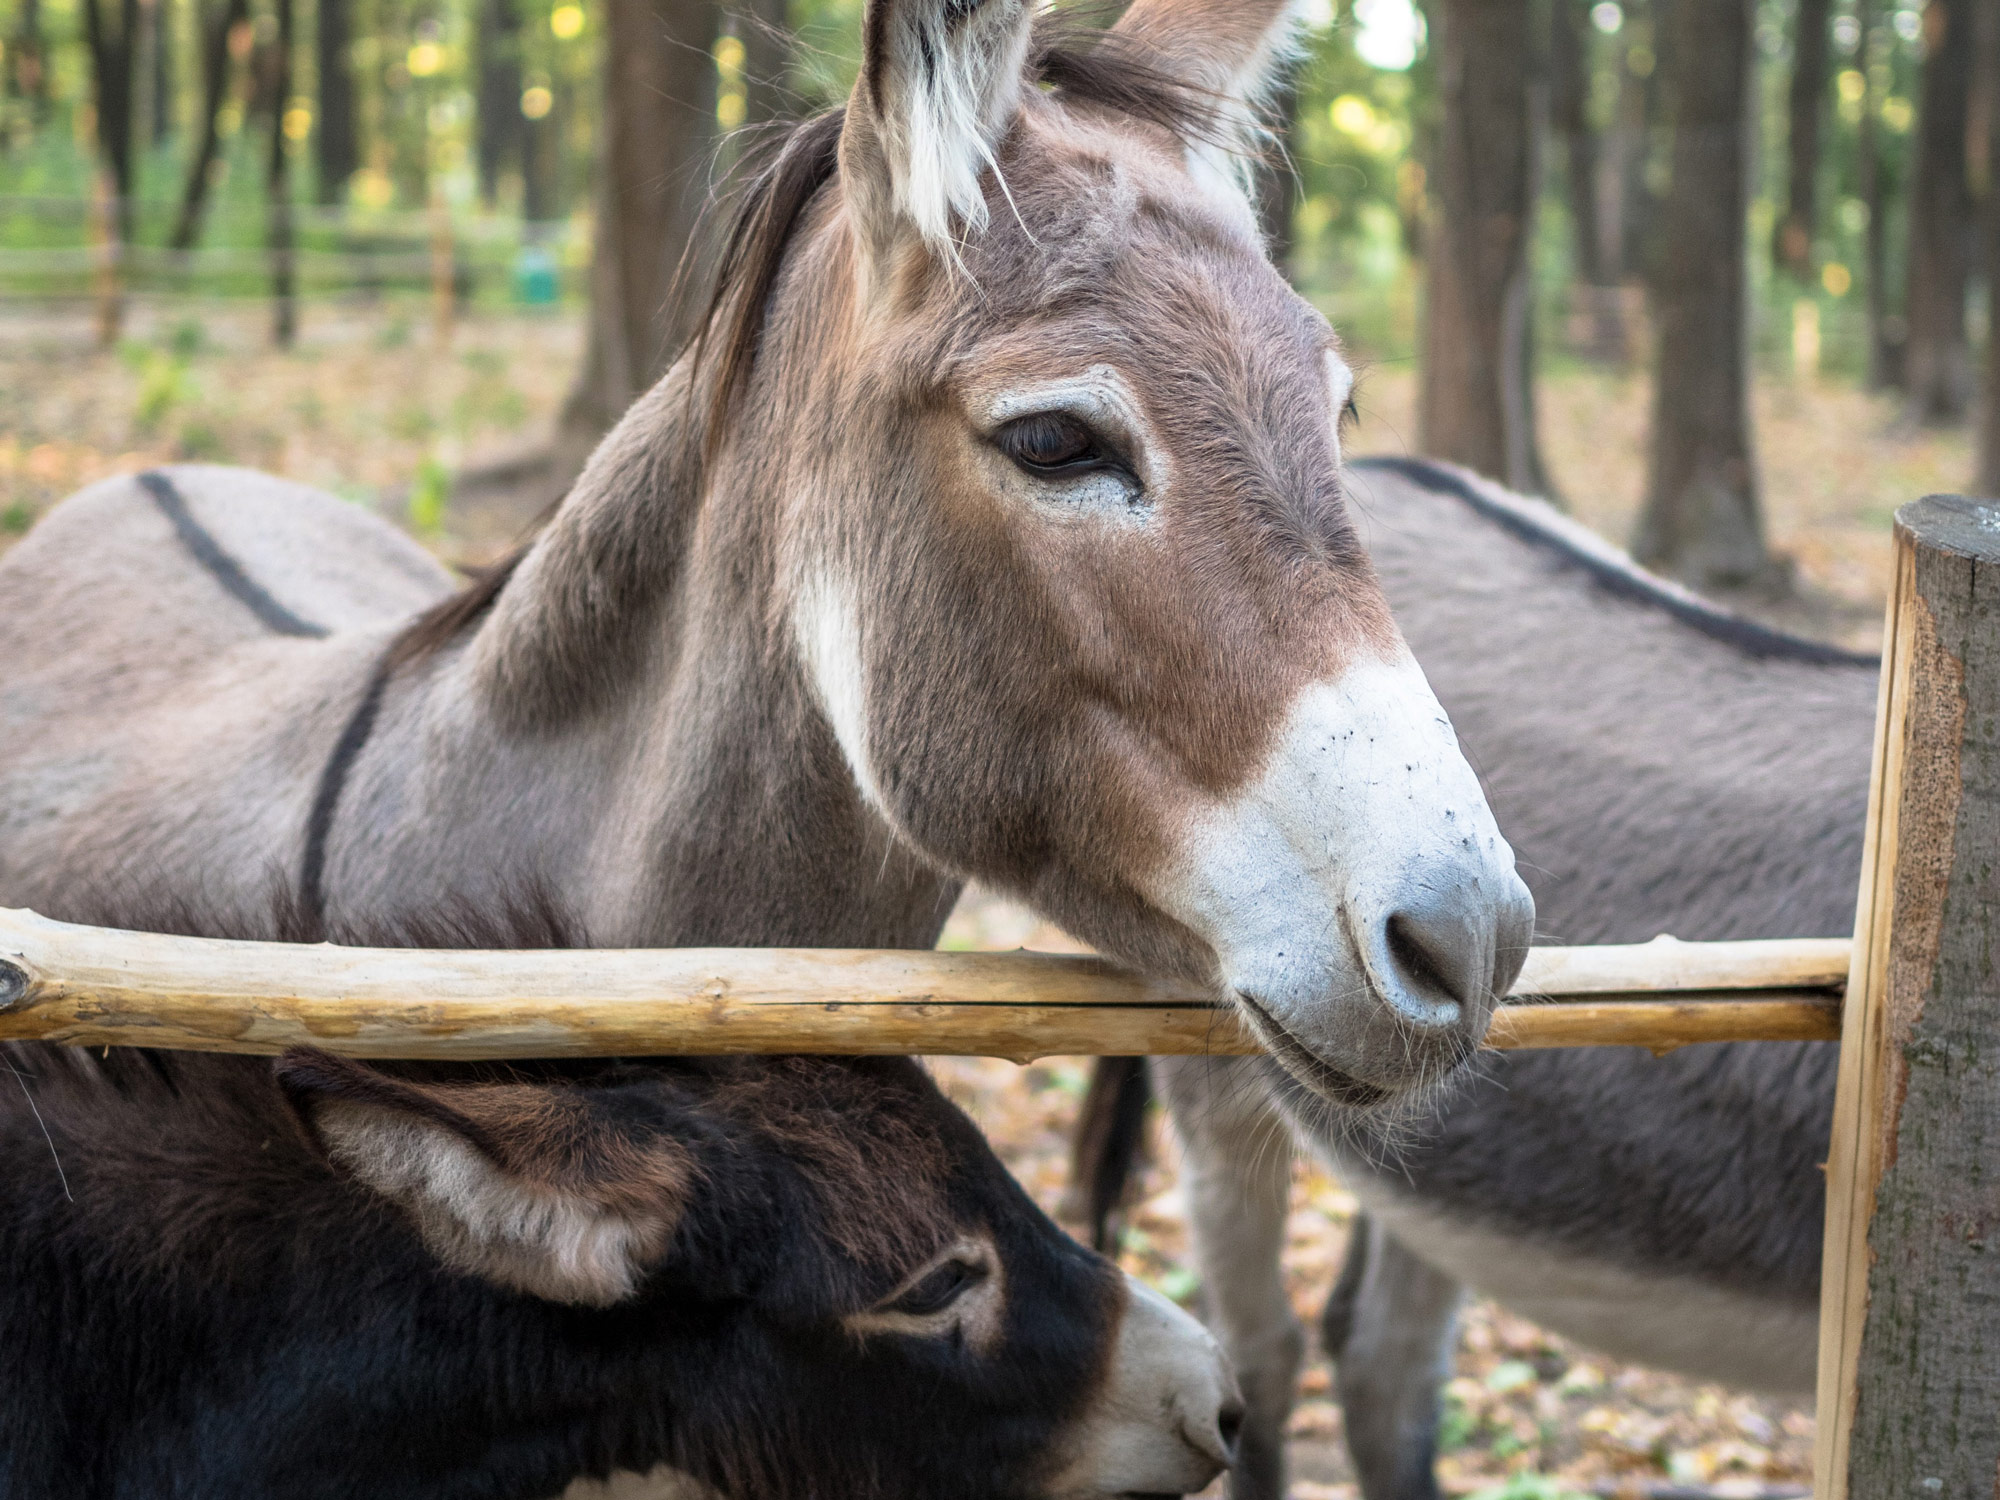 Turtle Valley Donkey Refuge: Make new friends at the Turtle Valley Donkey Refuge. The refuge is a working farm dedicated to the care for neglected, abused or unwanted donkeys. Visit our furry friends, learn […]